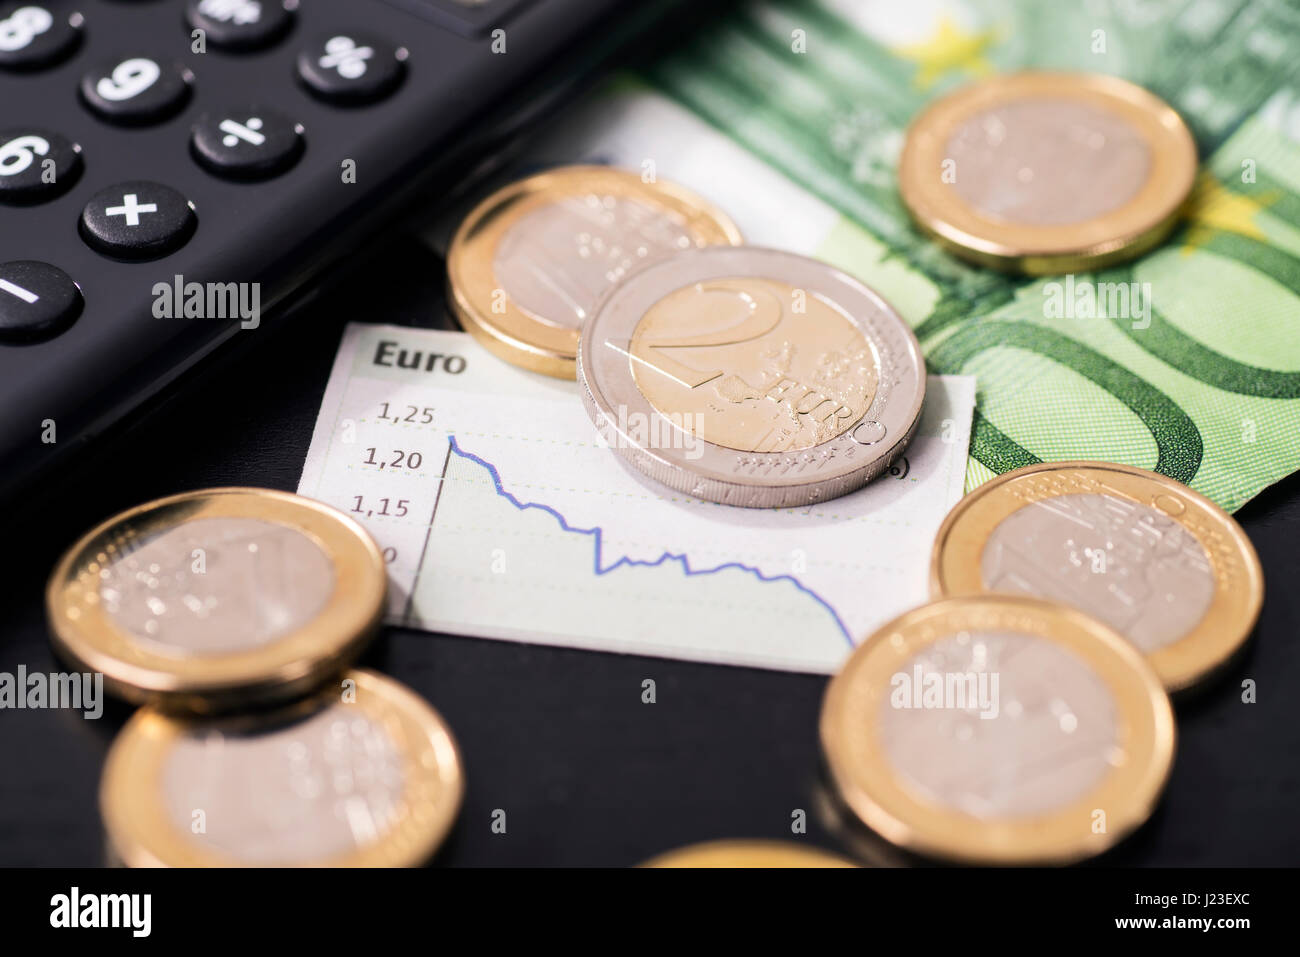 A graphic shows the falling euro rate and is surrounded by euro coins. Stock Photo